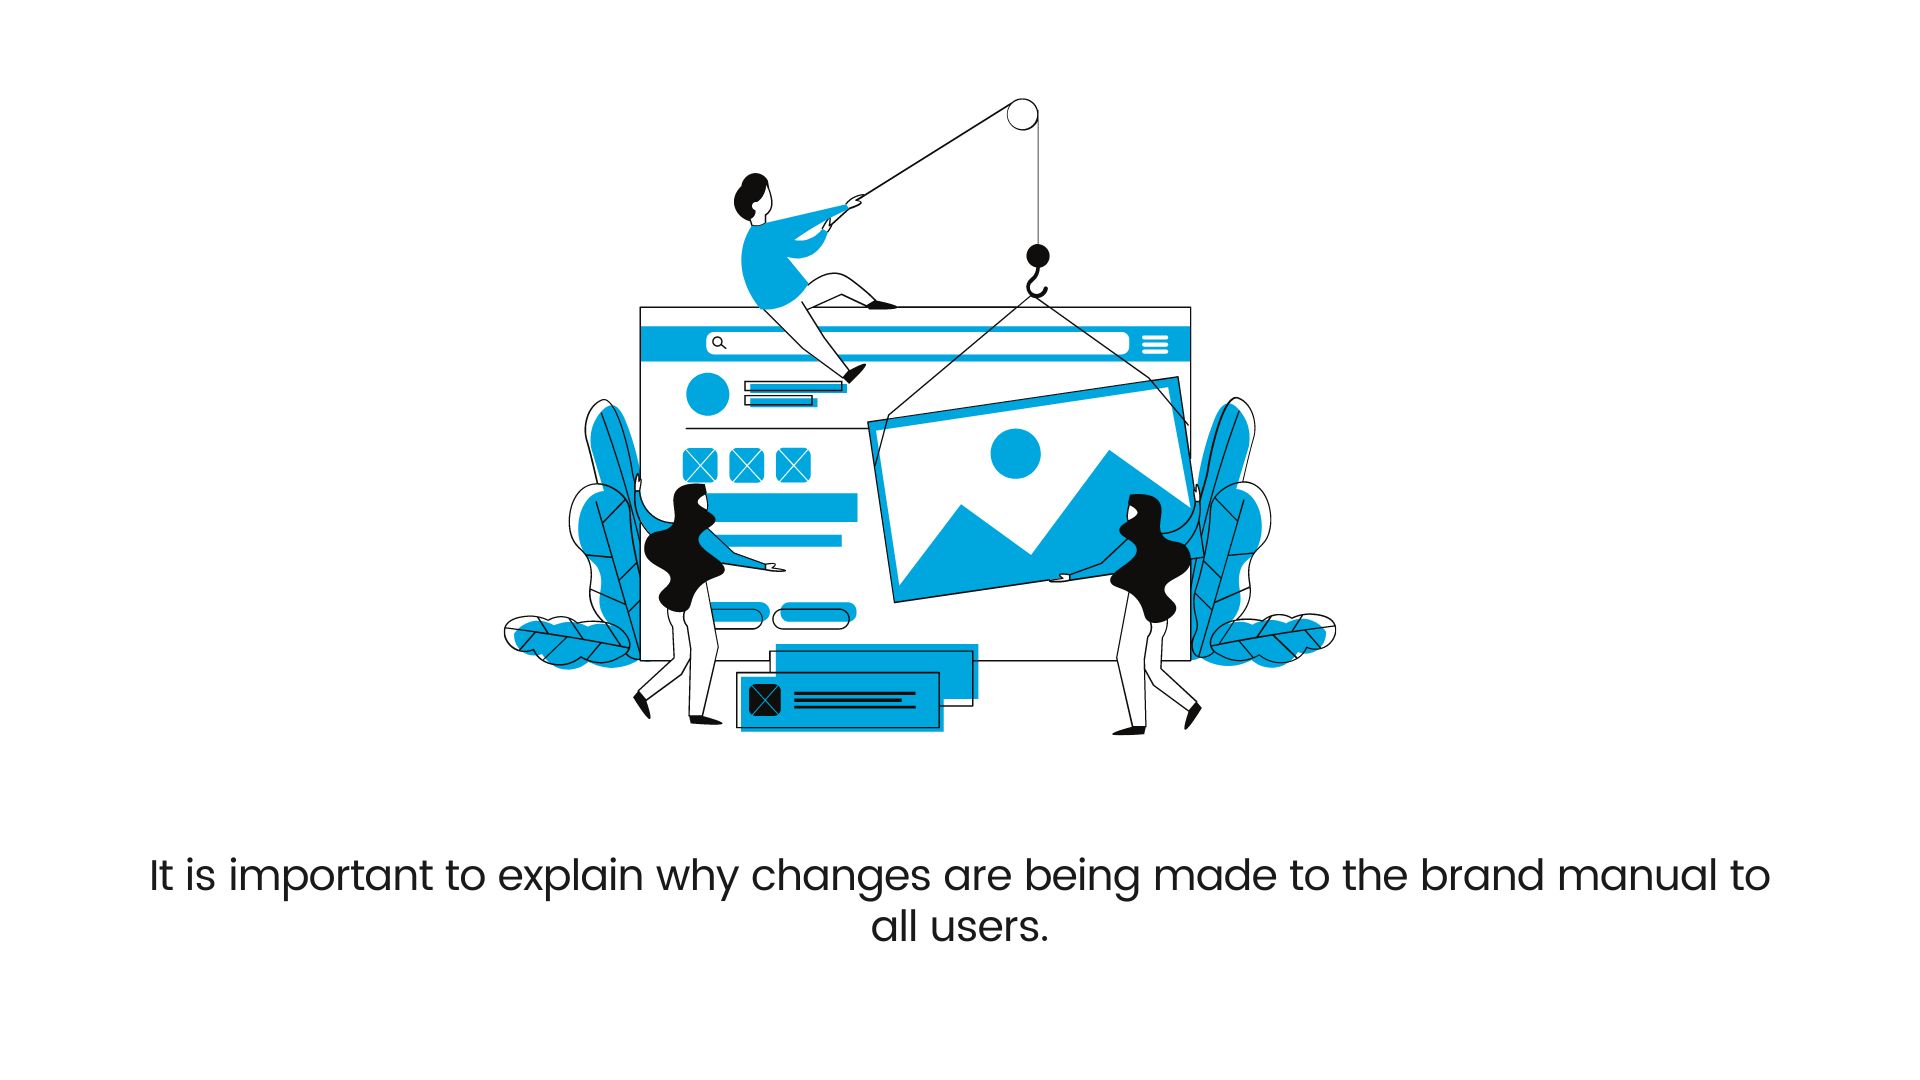 It is important to explain why changes are being made to the brand manual to all users.